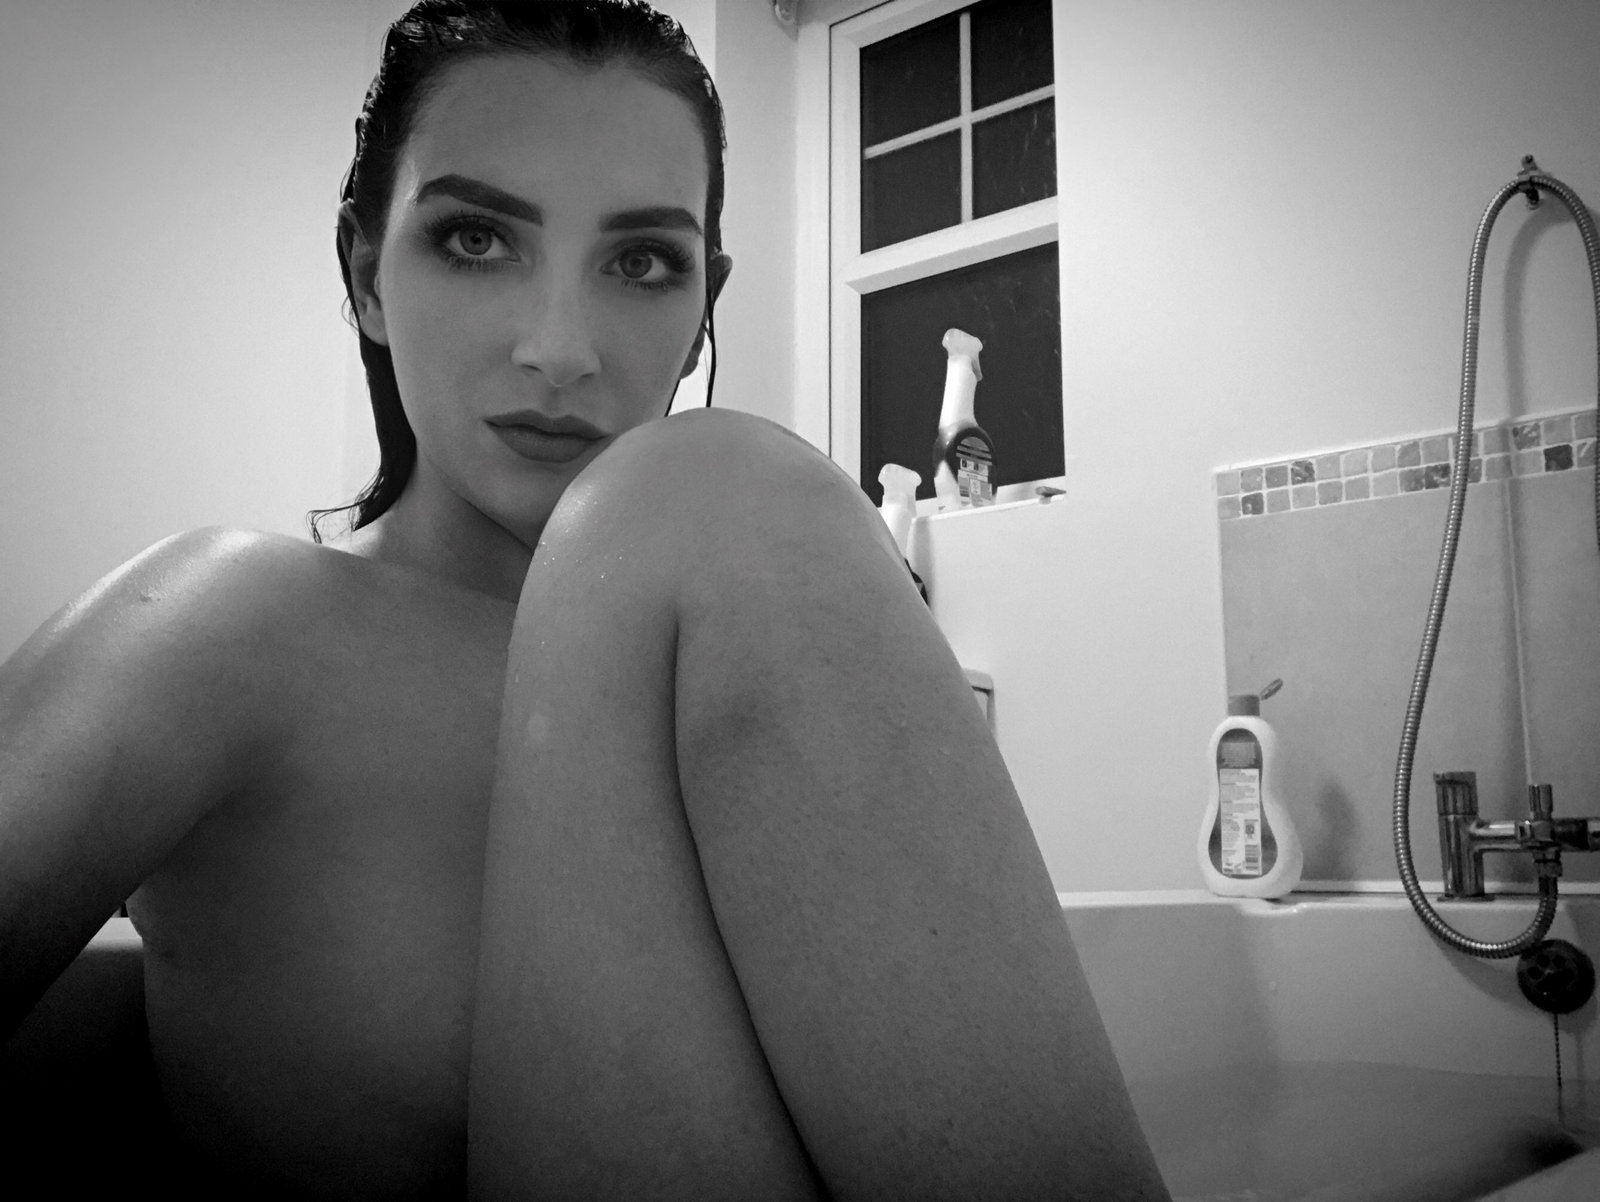 Photo by Elizabeth-xo with the username @Elizabeth-xo,  December 5, 2020 at 1:13 AM. The post is about the topic Wet and the text says 'Bathe with me'